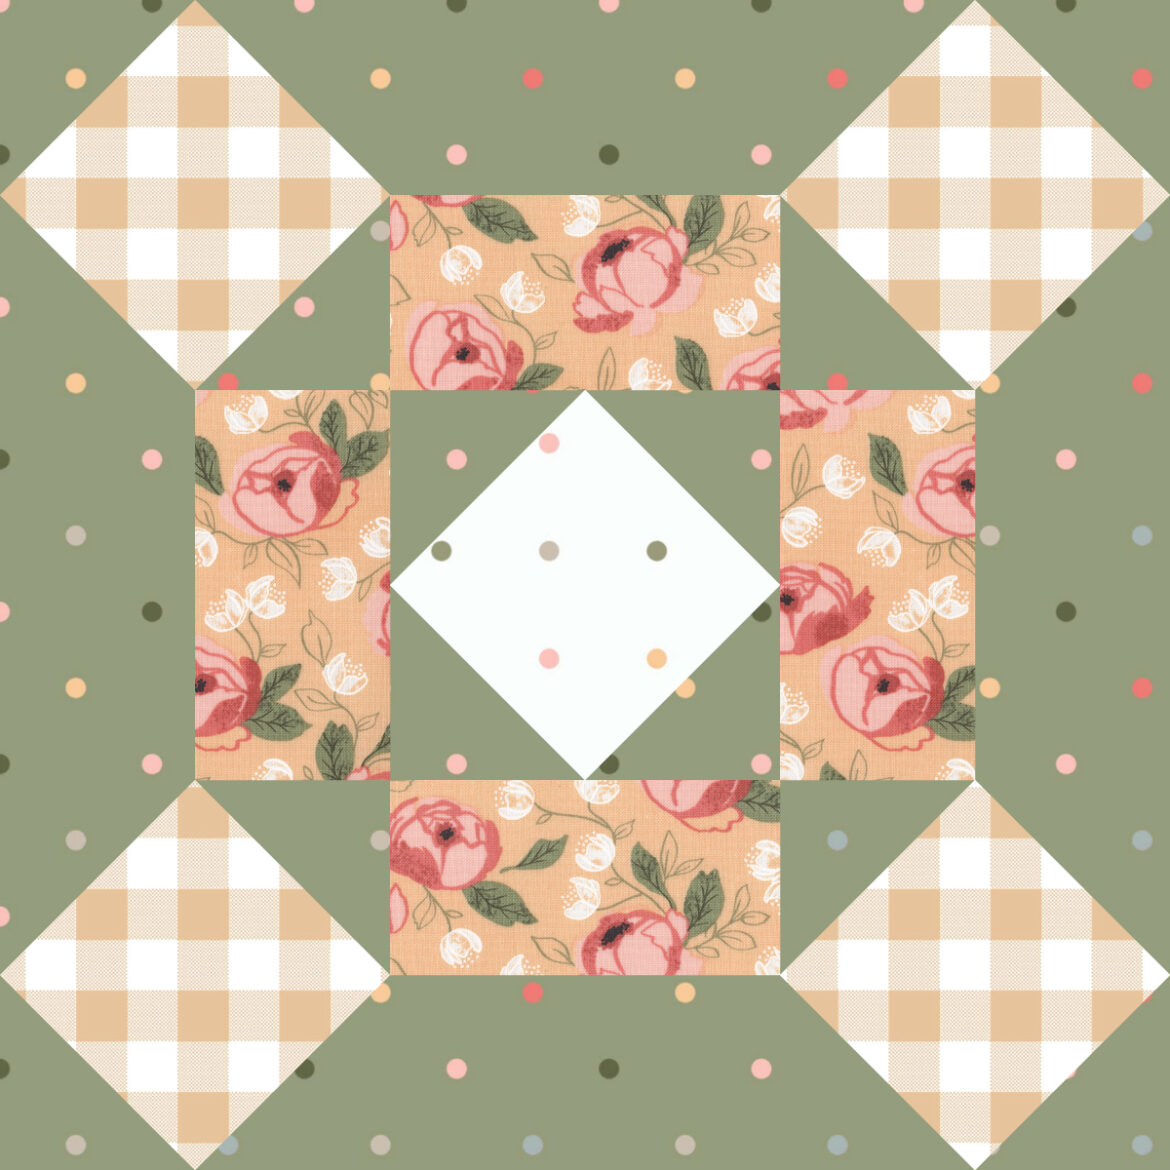 Sewcialites 2 Block 11 "Nurture" by Lissa Alexander. Fabric is Country Rose by Lella Boutique for Moda Fabrics. Download the free block pattern here.